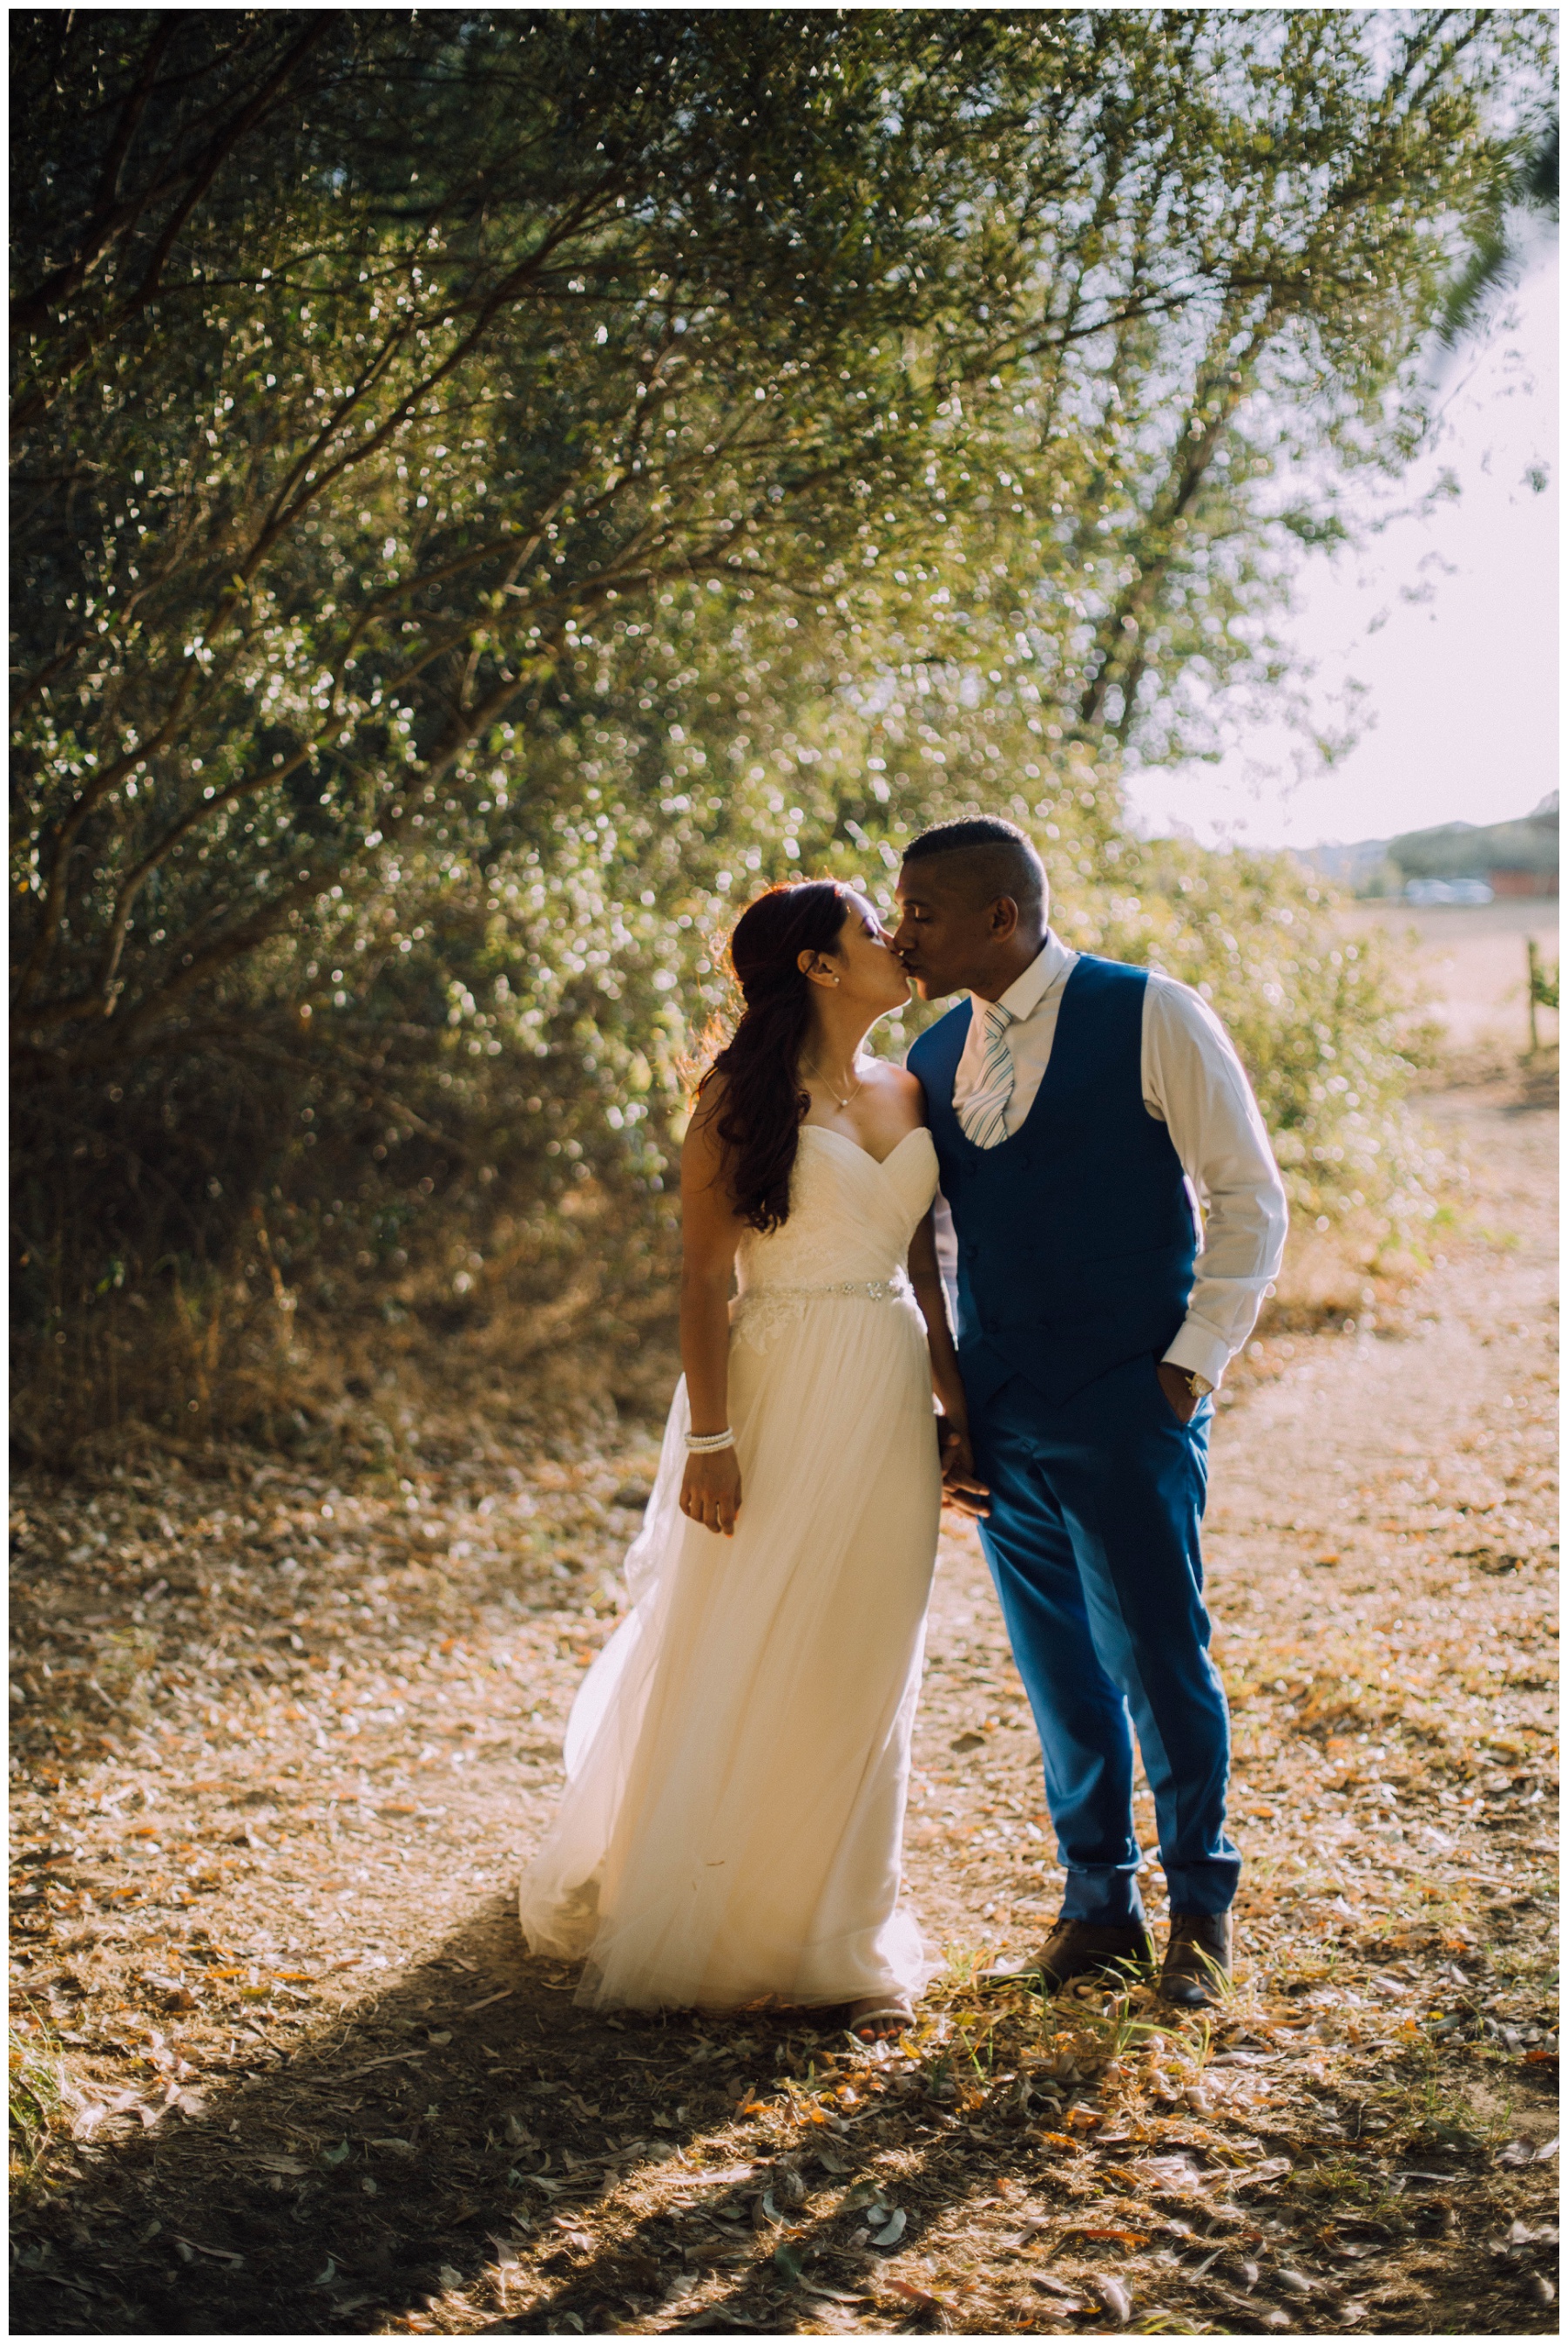 Ronel Kruger Cape Town Wedding and Lifestyle Photographer_1346.jpg